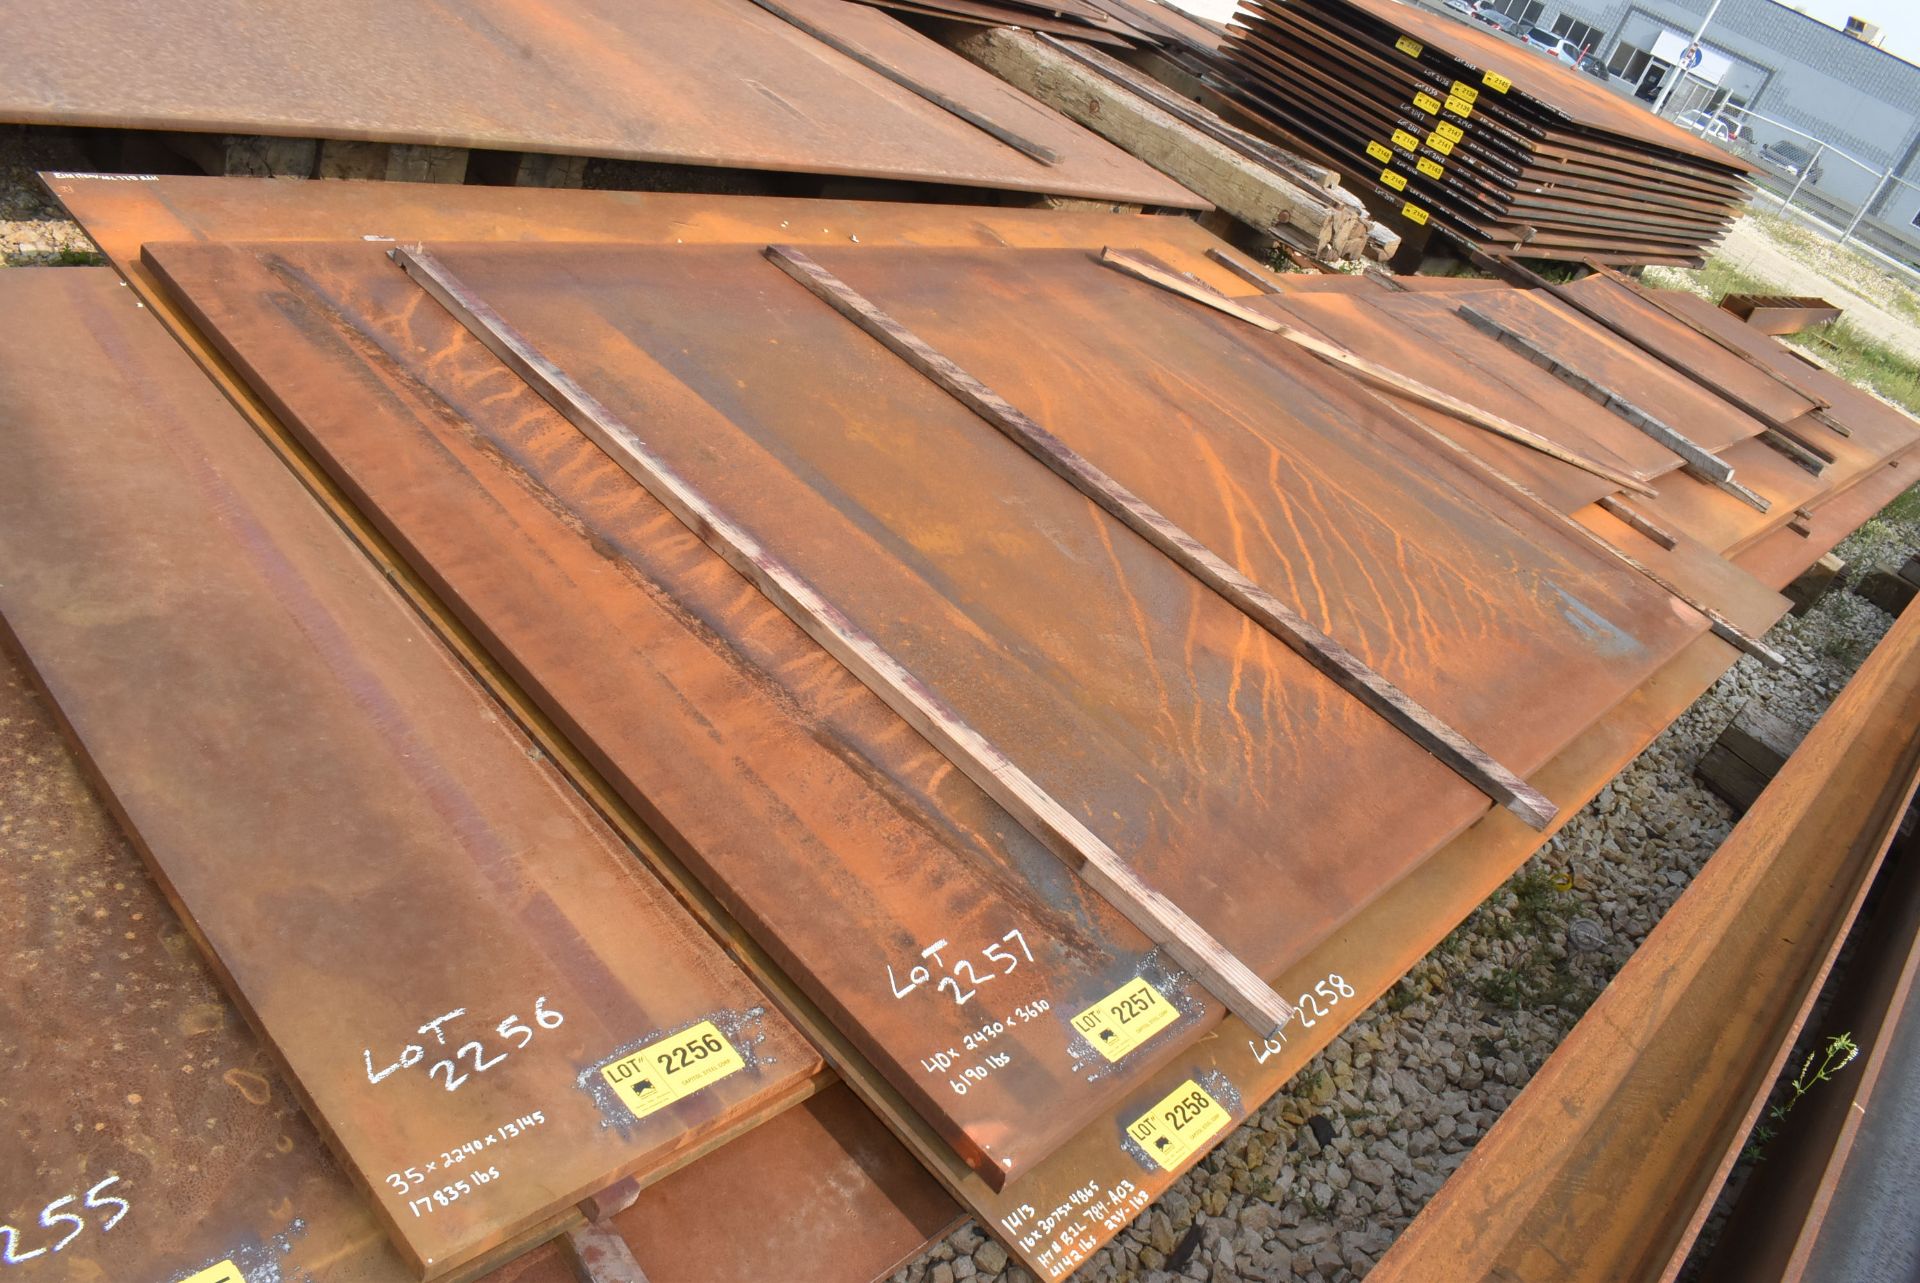 STRUCTURAL STEEL PLATE - 40mmX2,430mmX3,680mm 6,190 LBS. (CI) - Image 2 of 3